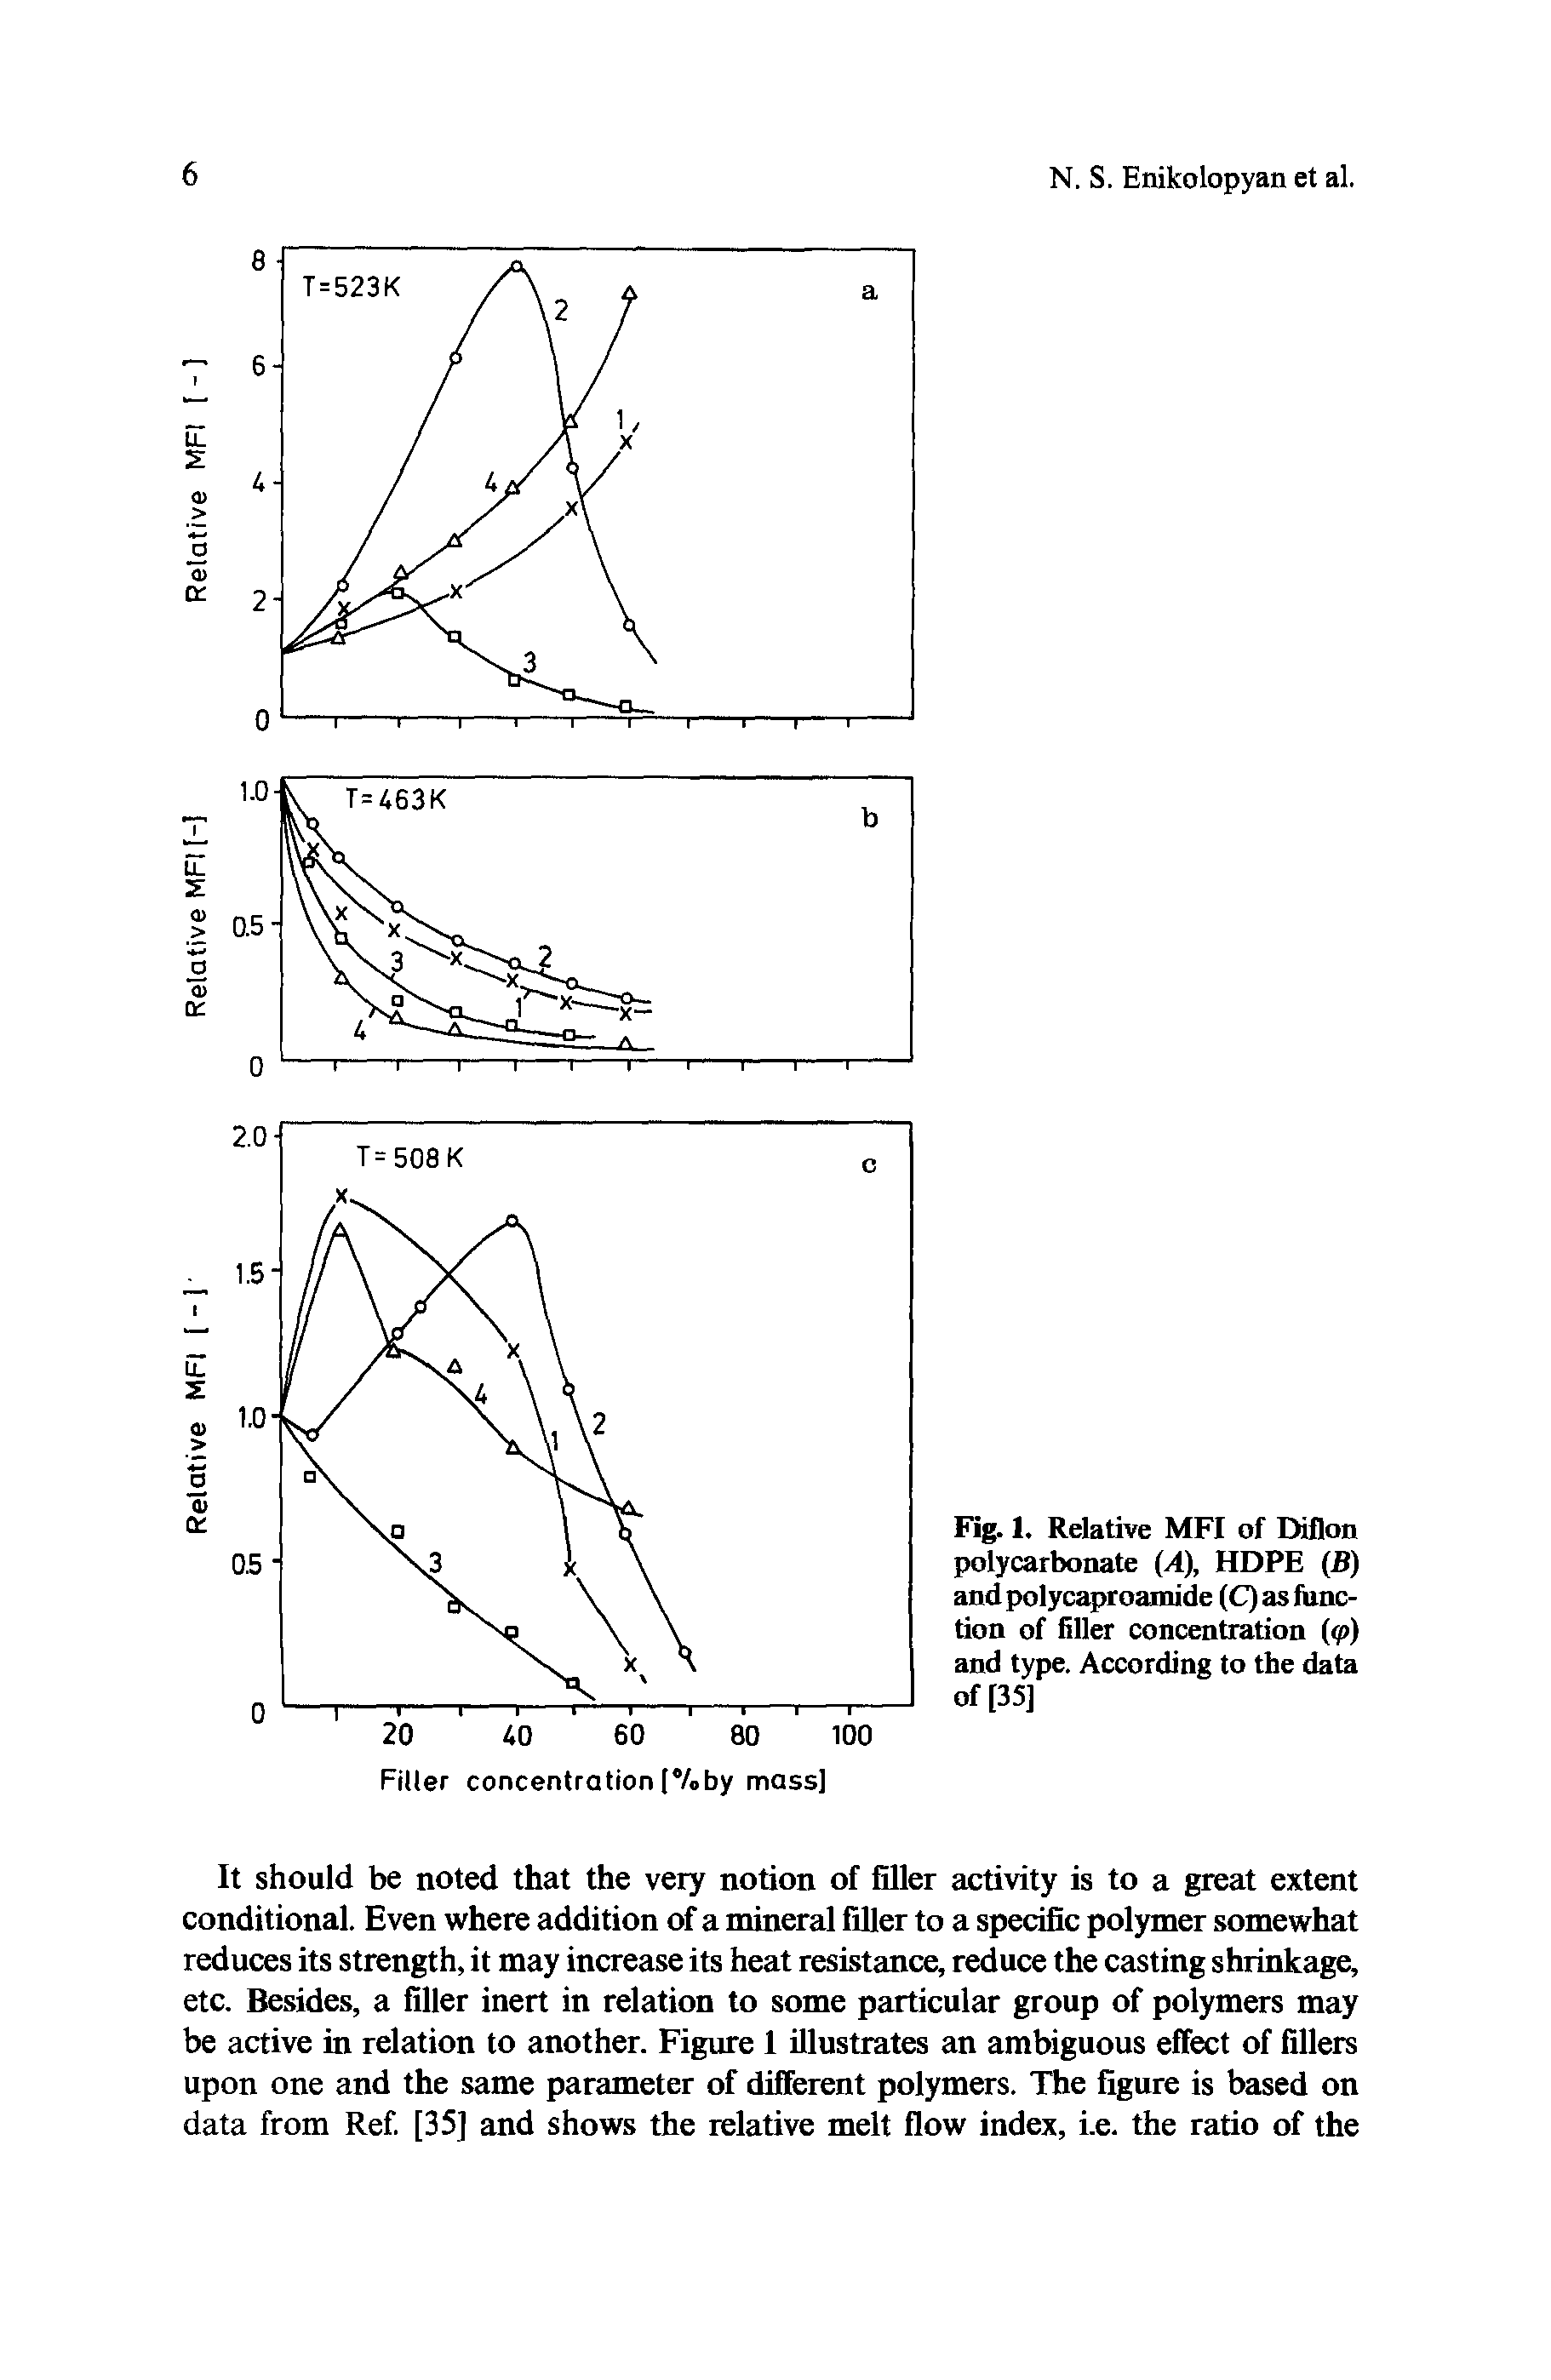 Fig. 1. Relative MFI of Diflon polycarbonate (A), HDPE (B) and polycaproamide (C) as function of filler concentration (<p) and type. According to the data of [35]...